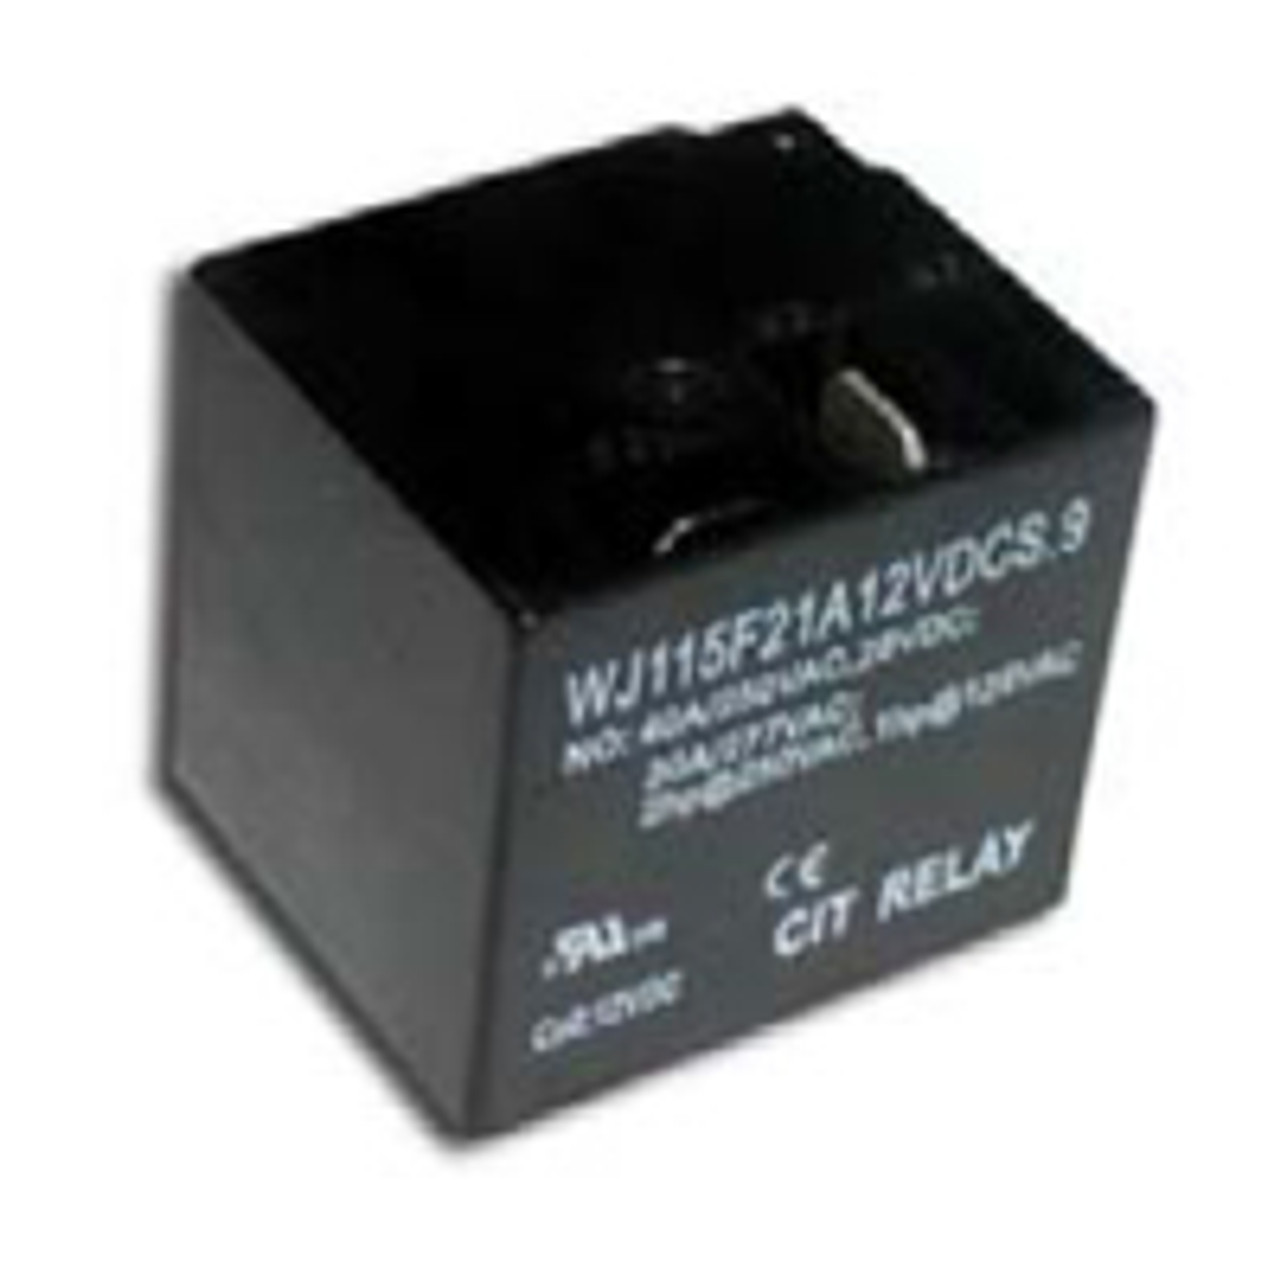 CIT Relay and Switch J115F21A9VDCN.6U Power Relays